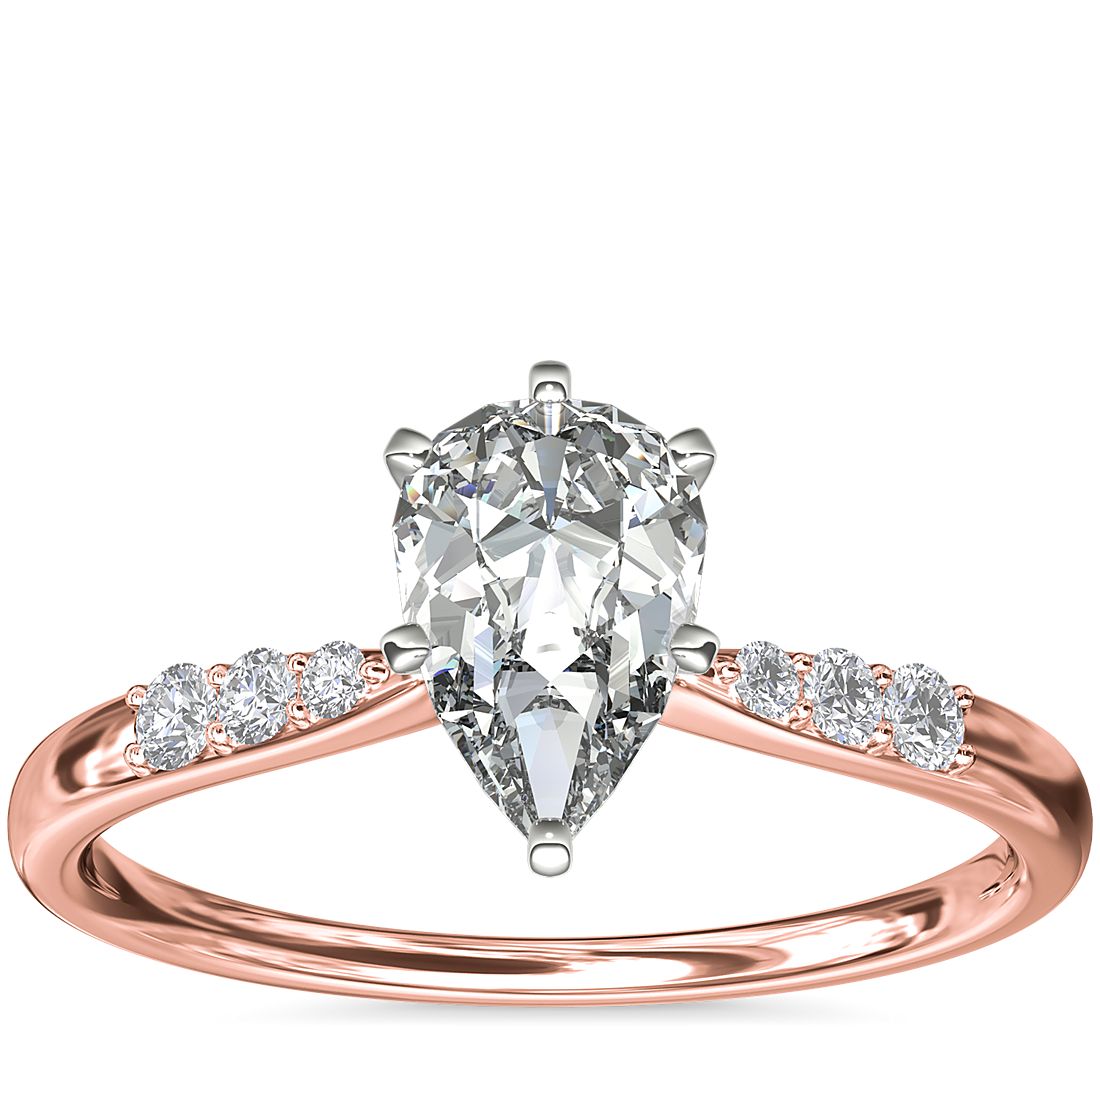 A rose gold engagement ring with a pear 1-carat diamond.